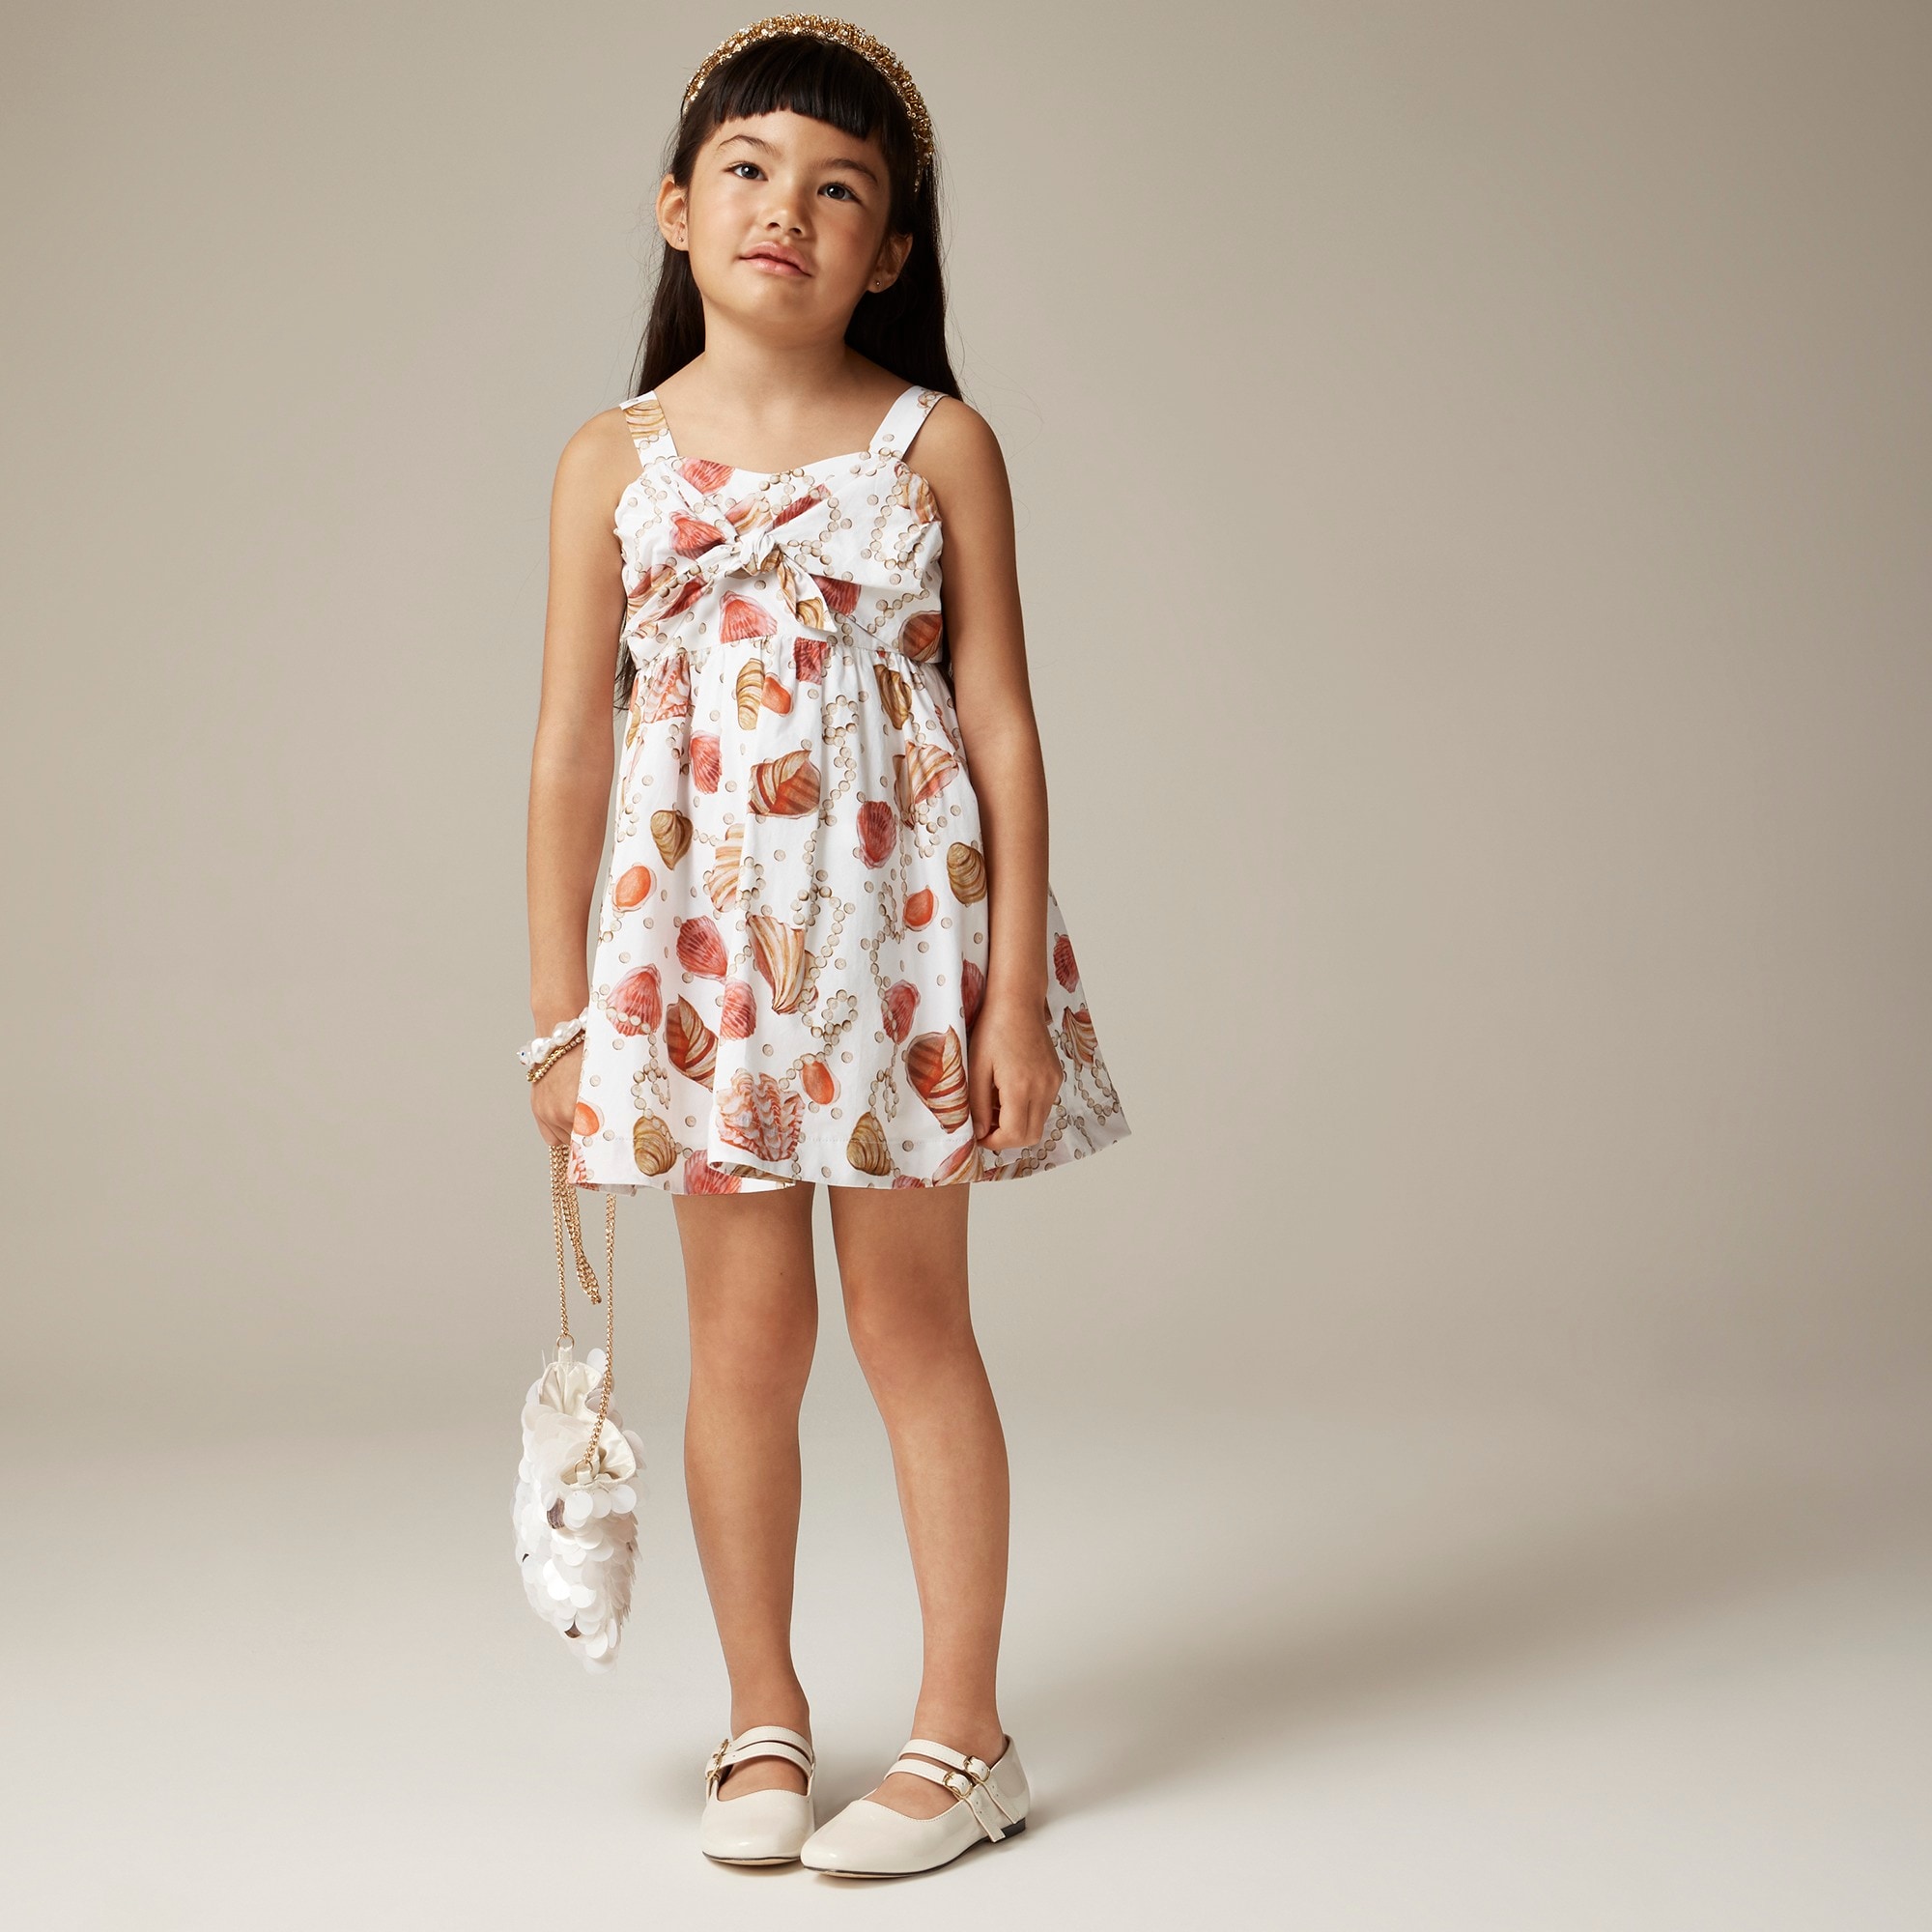  Girls' bow-front dress in painted seashell print